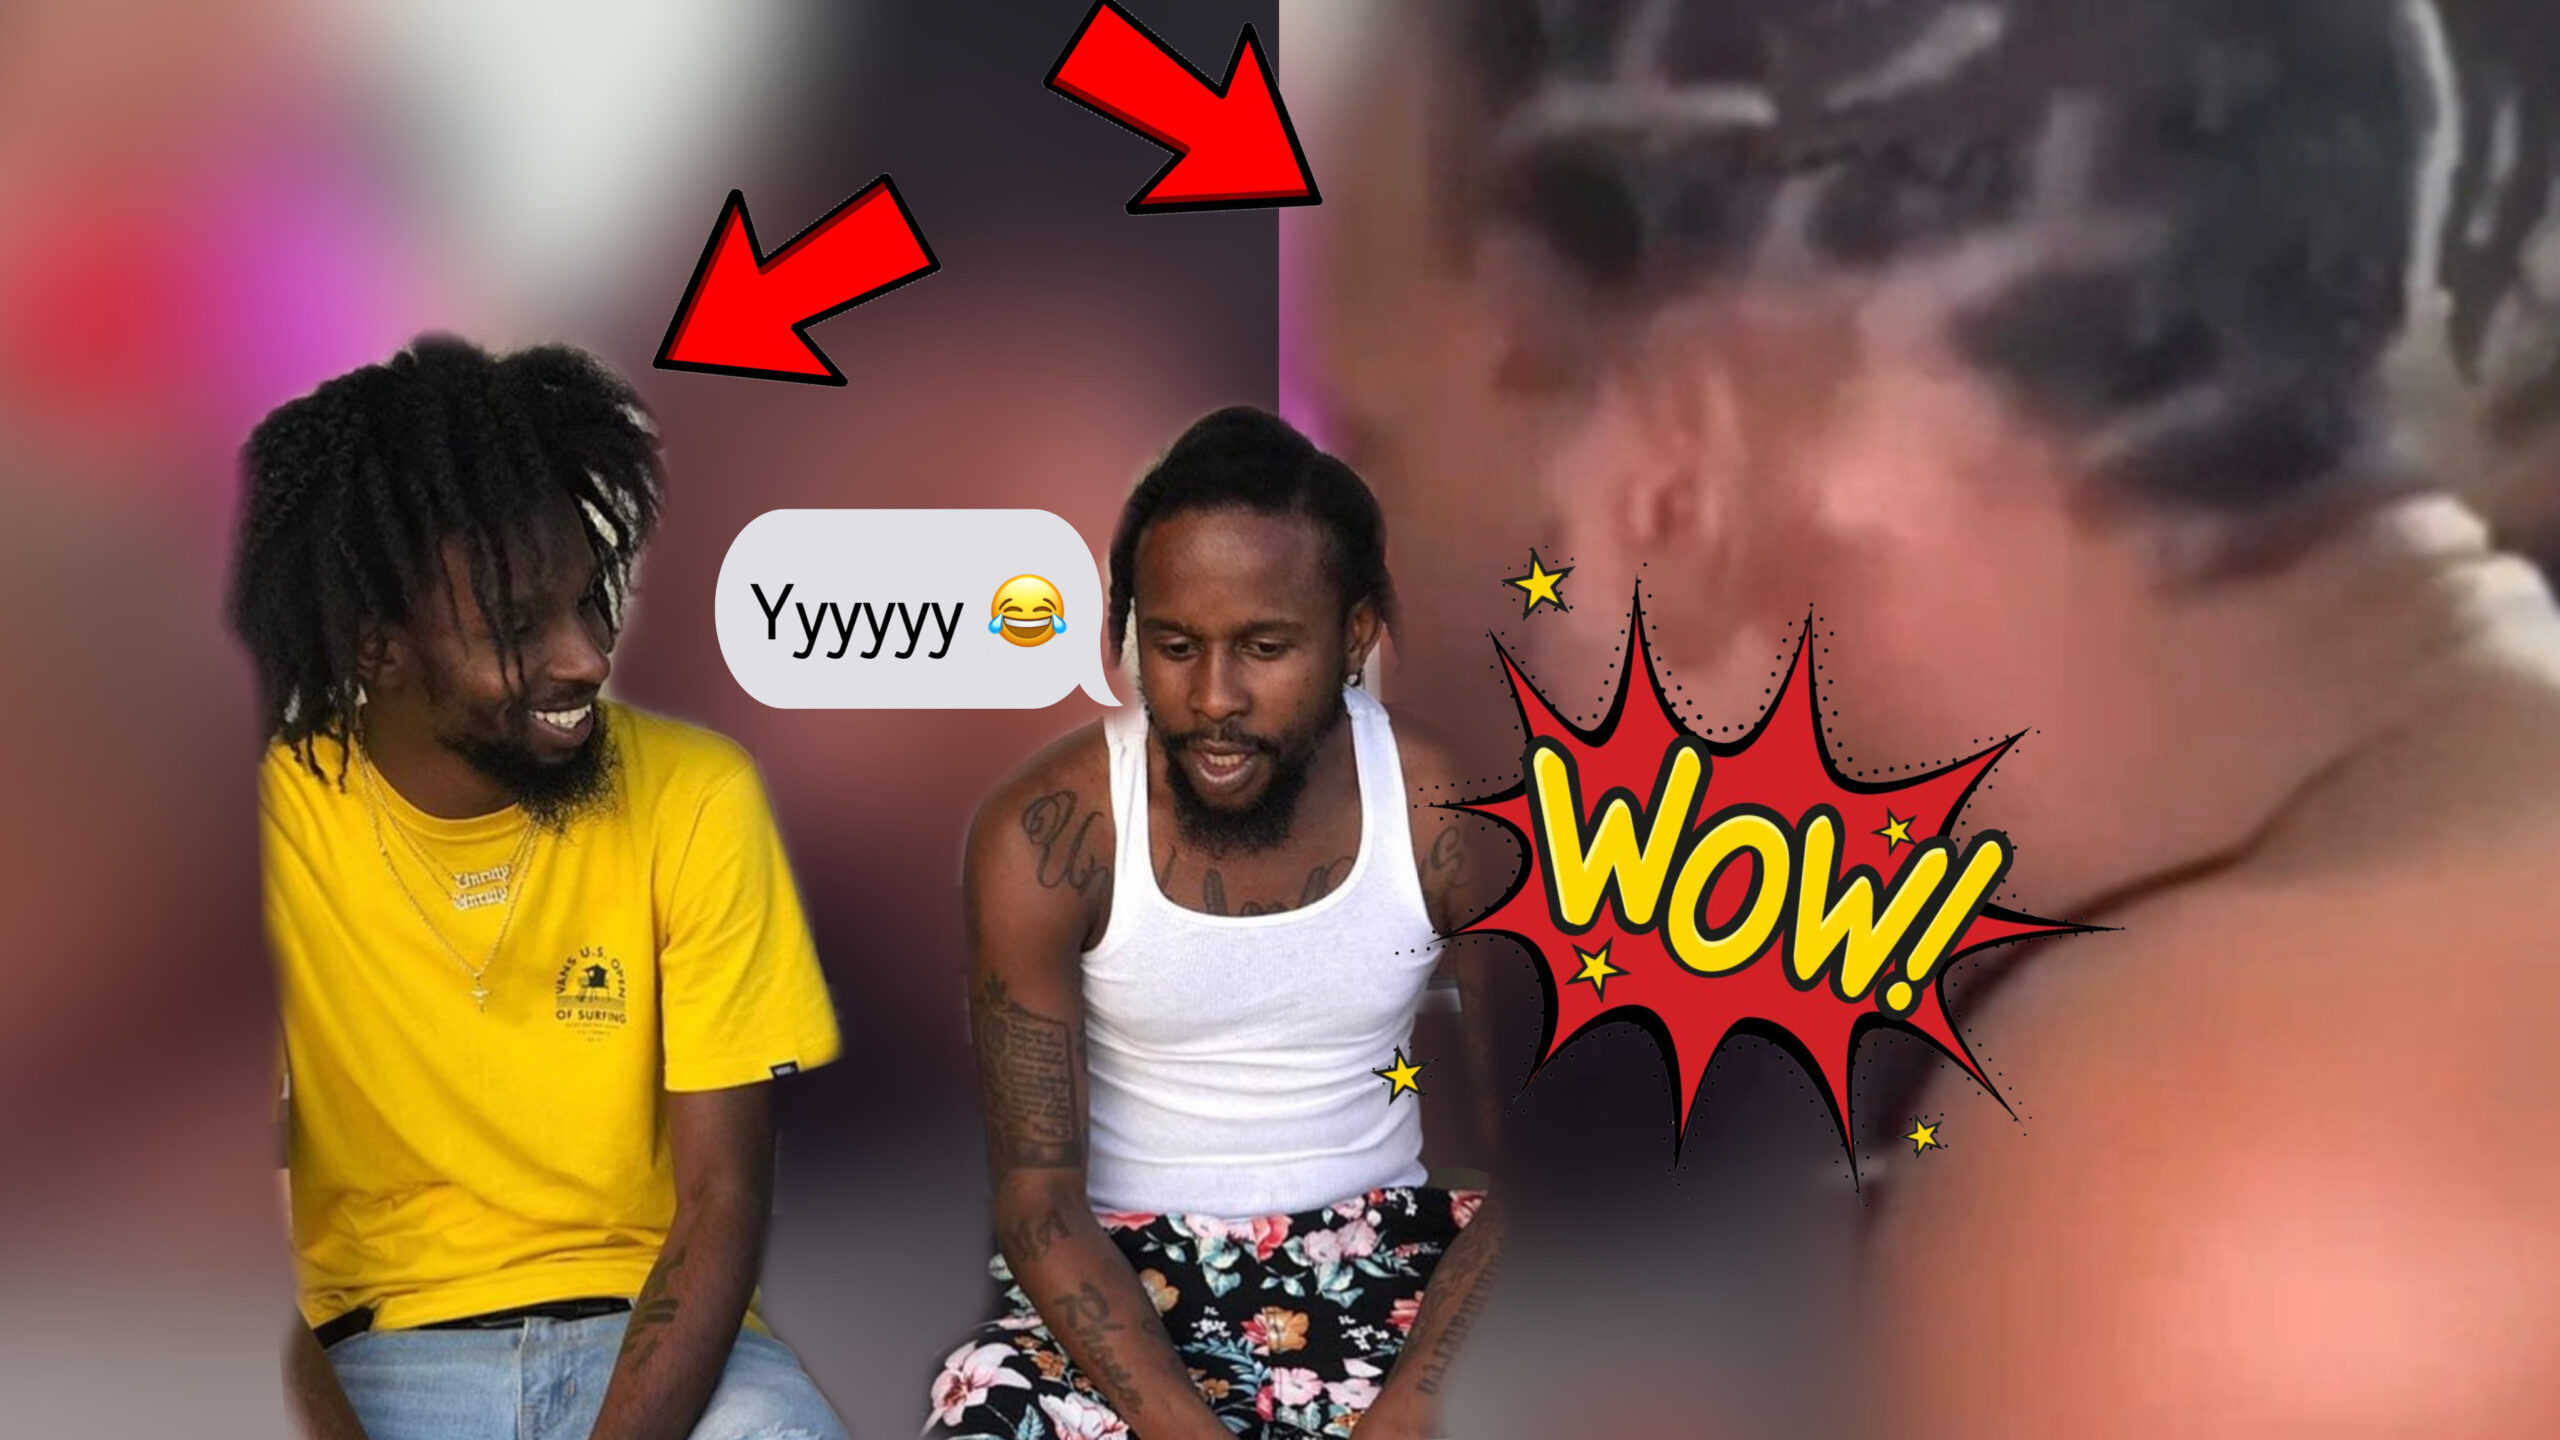 WATCH: Popcaan Brother Leaked Video Viral On Twitter & Social Media, Find Out Direct Download link & Latest Details